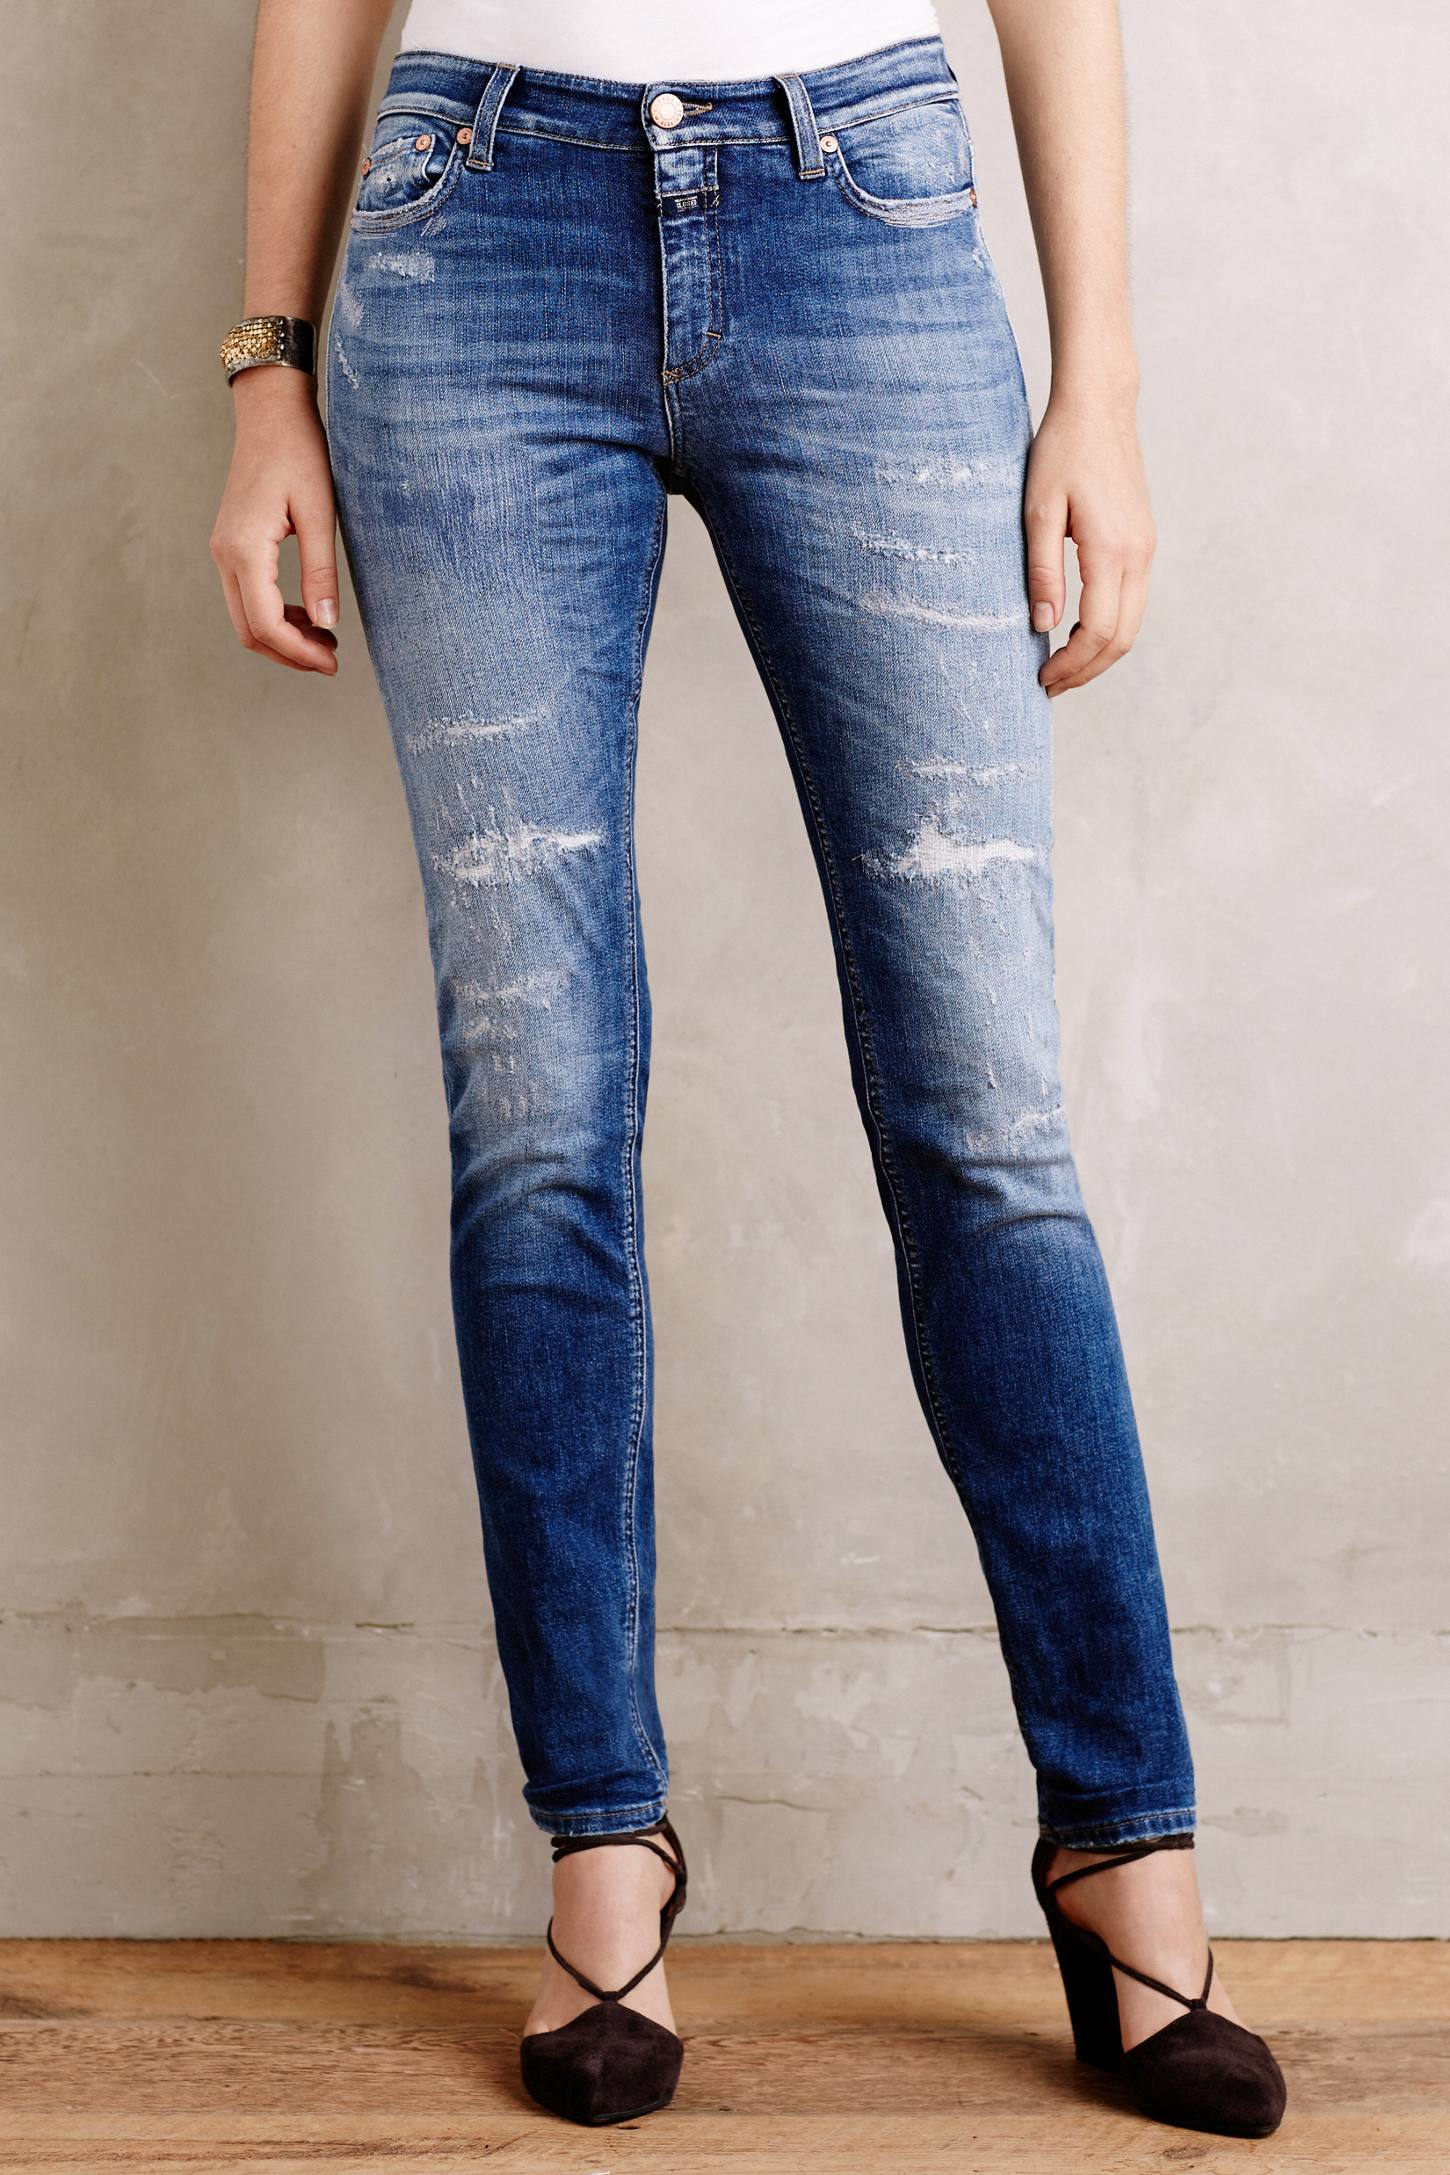 Lyst - Closed Lizzy Jeans in Blue